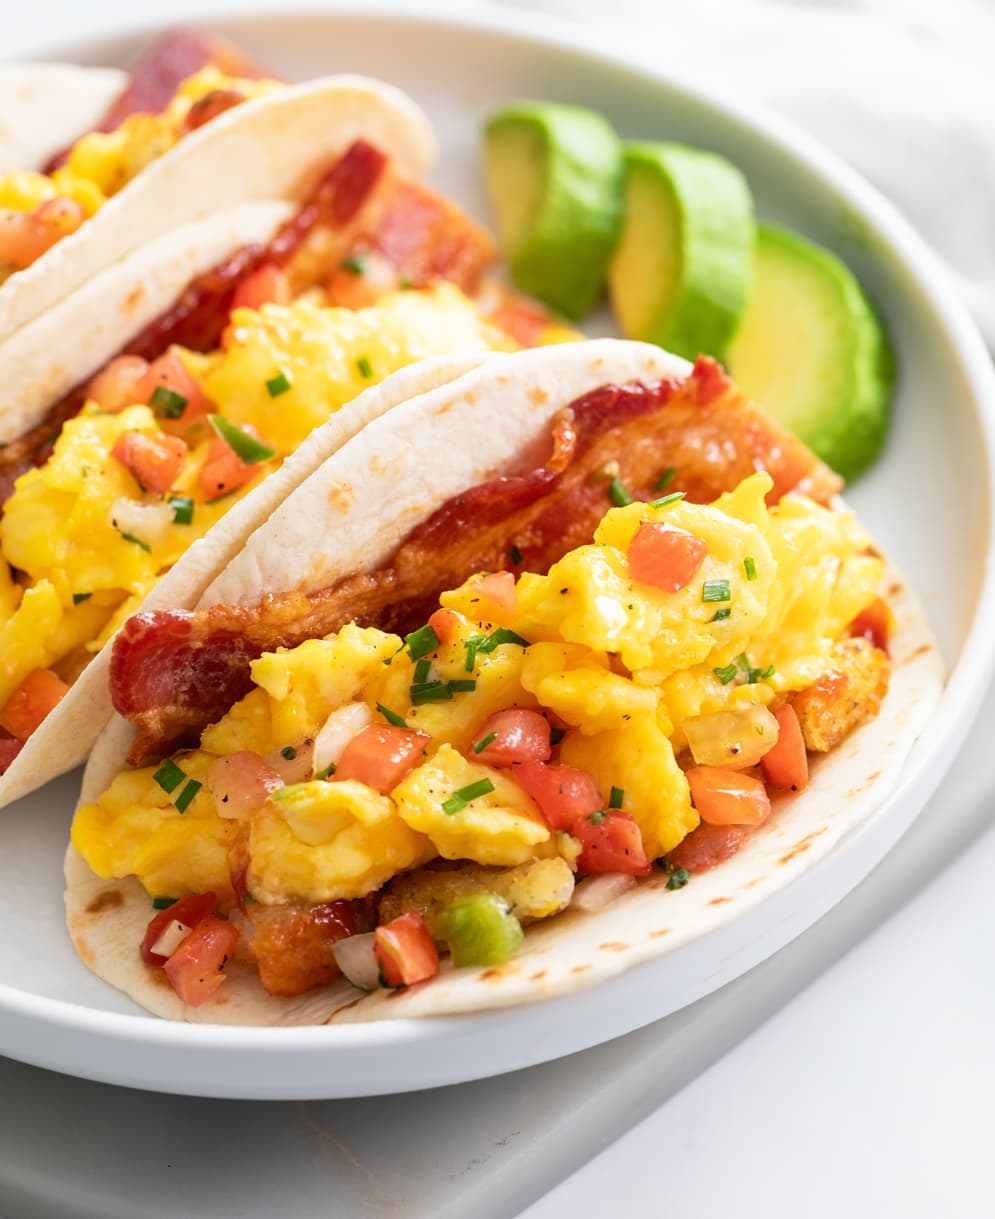 Breakfast Tacos filled with scrambled eggs, potatoes, and bacon on a white plate.